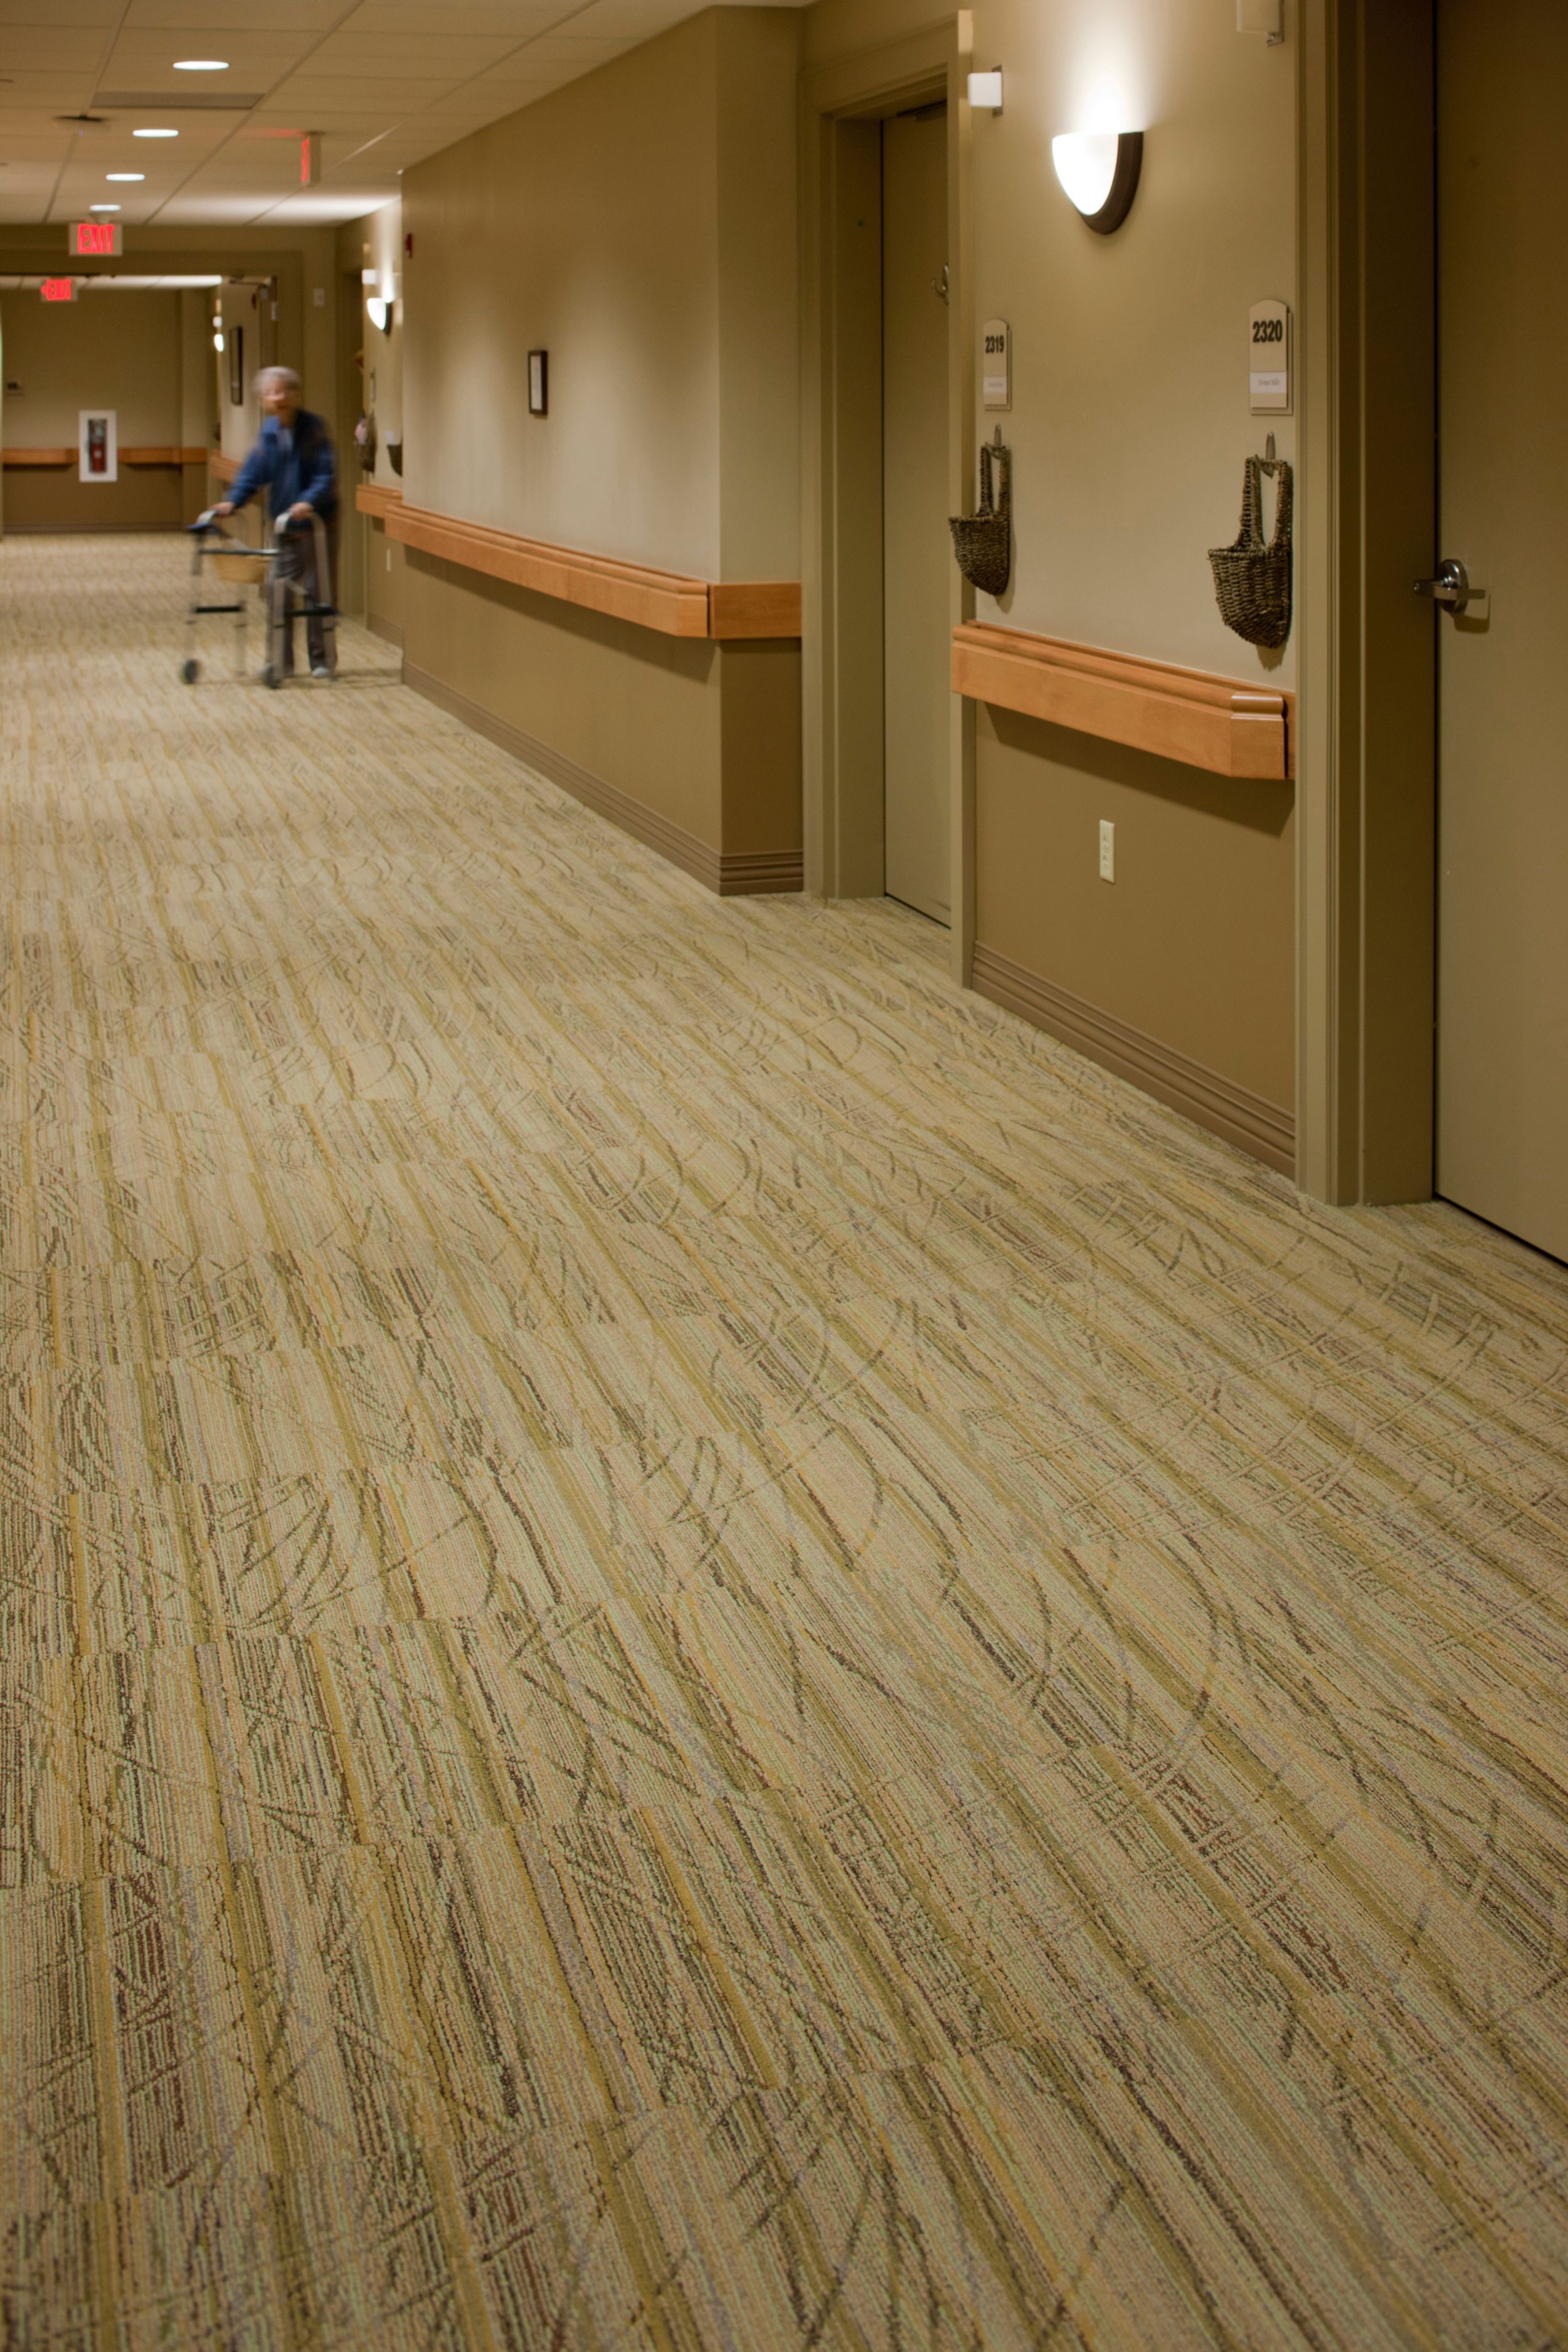 Interface Prairie Grass carpet tile in healthcare corridor with woman pushing man in wheelchair numéro d’image 16